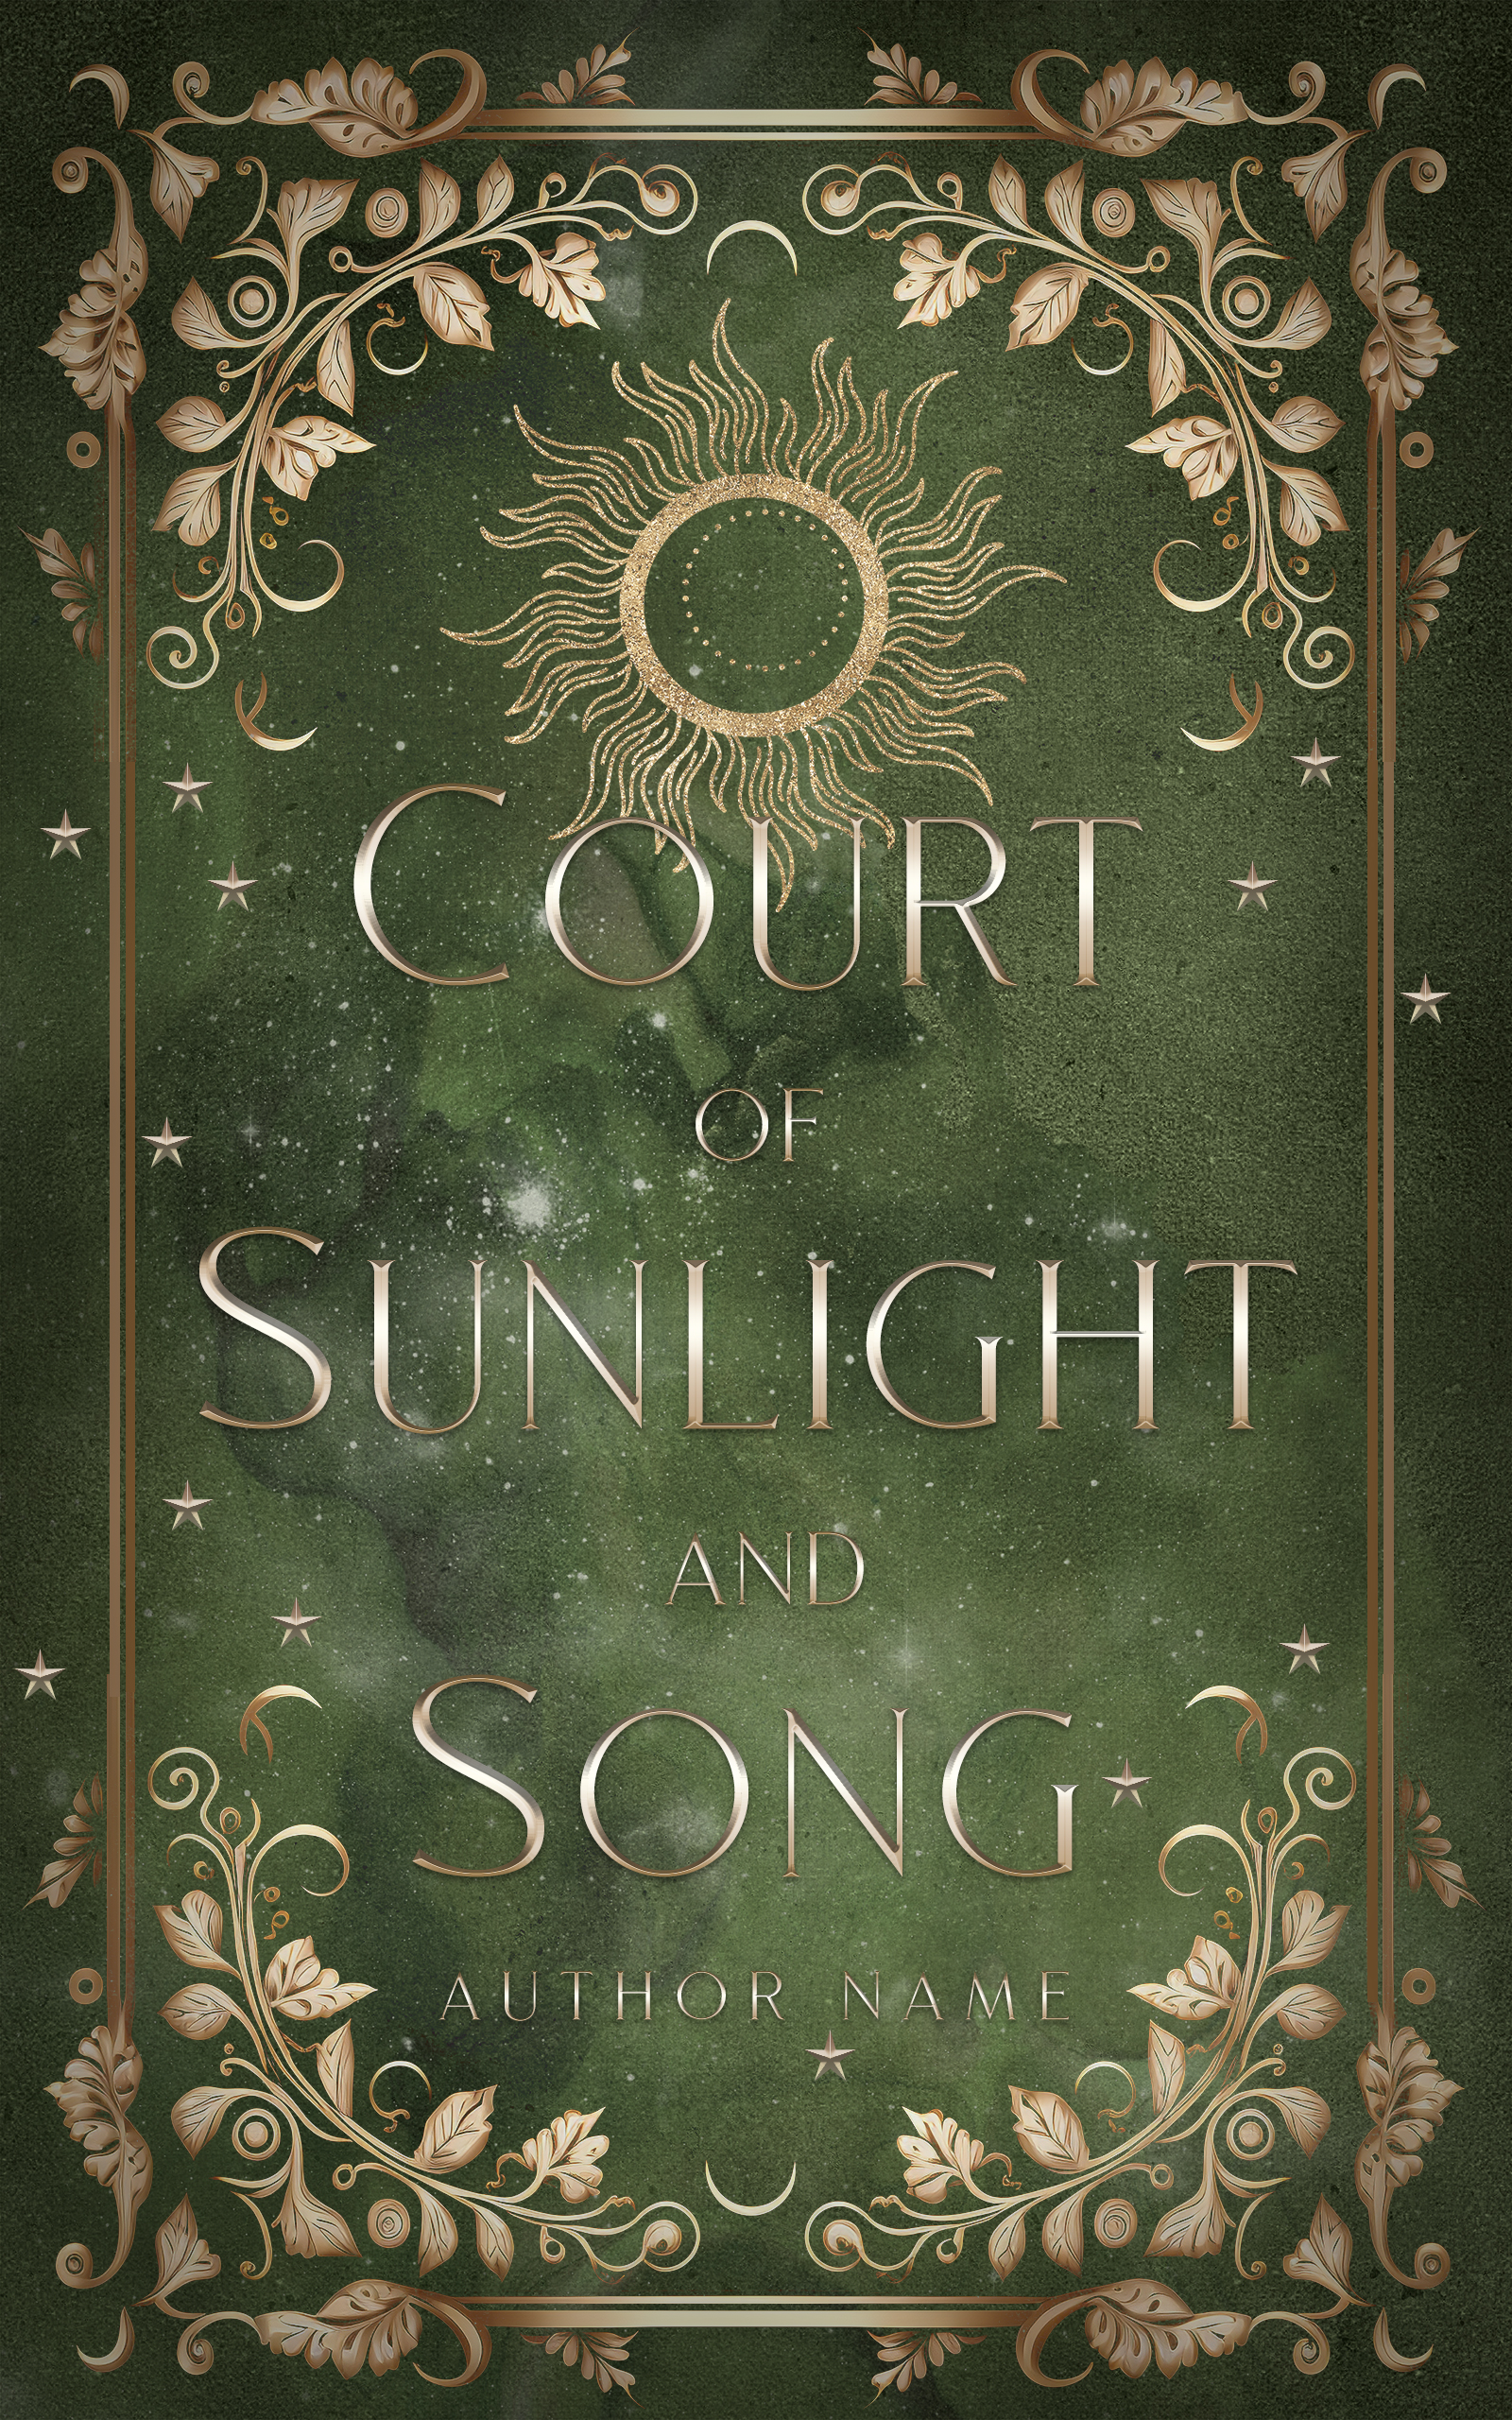 A green fantasy book cover with gold botanical and sun decorations.